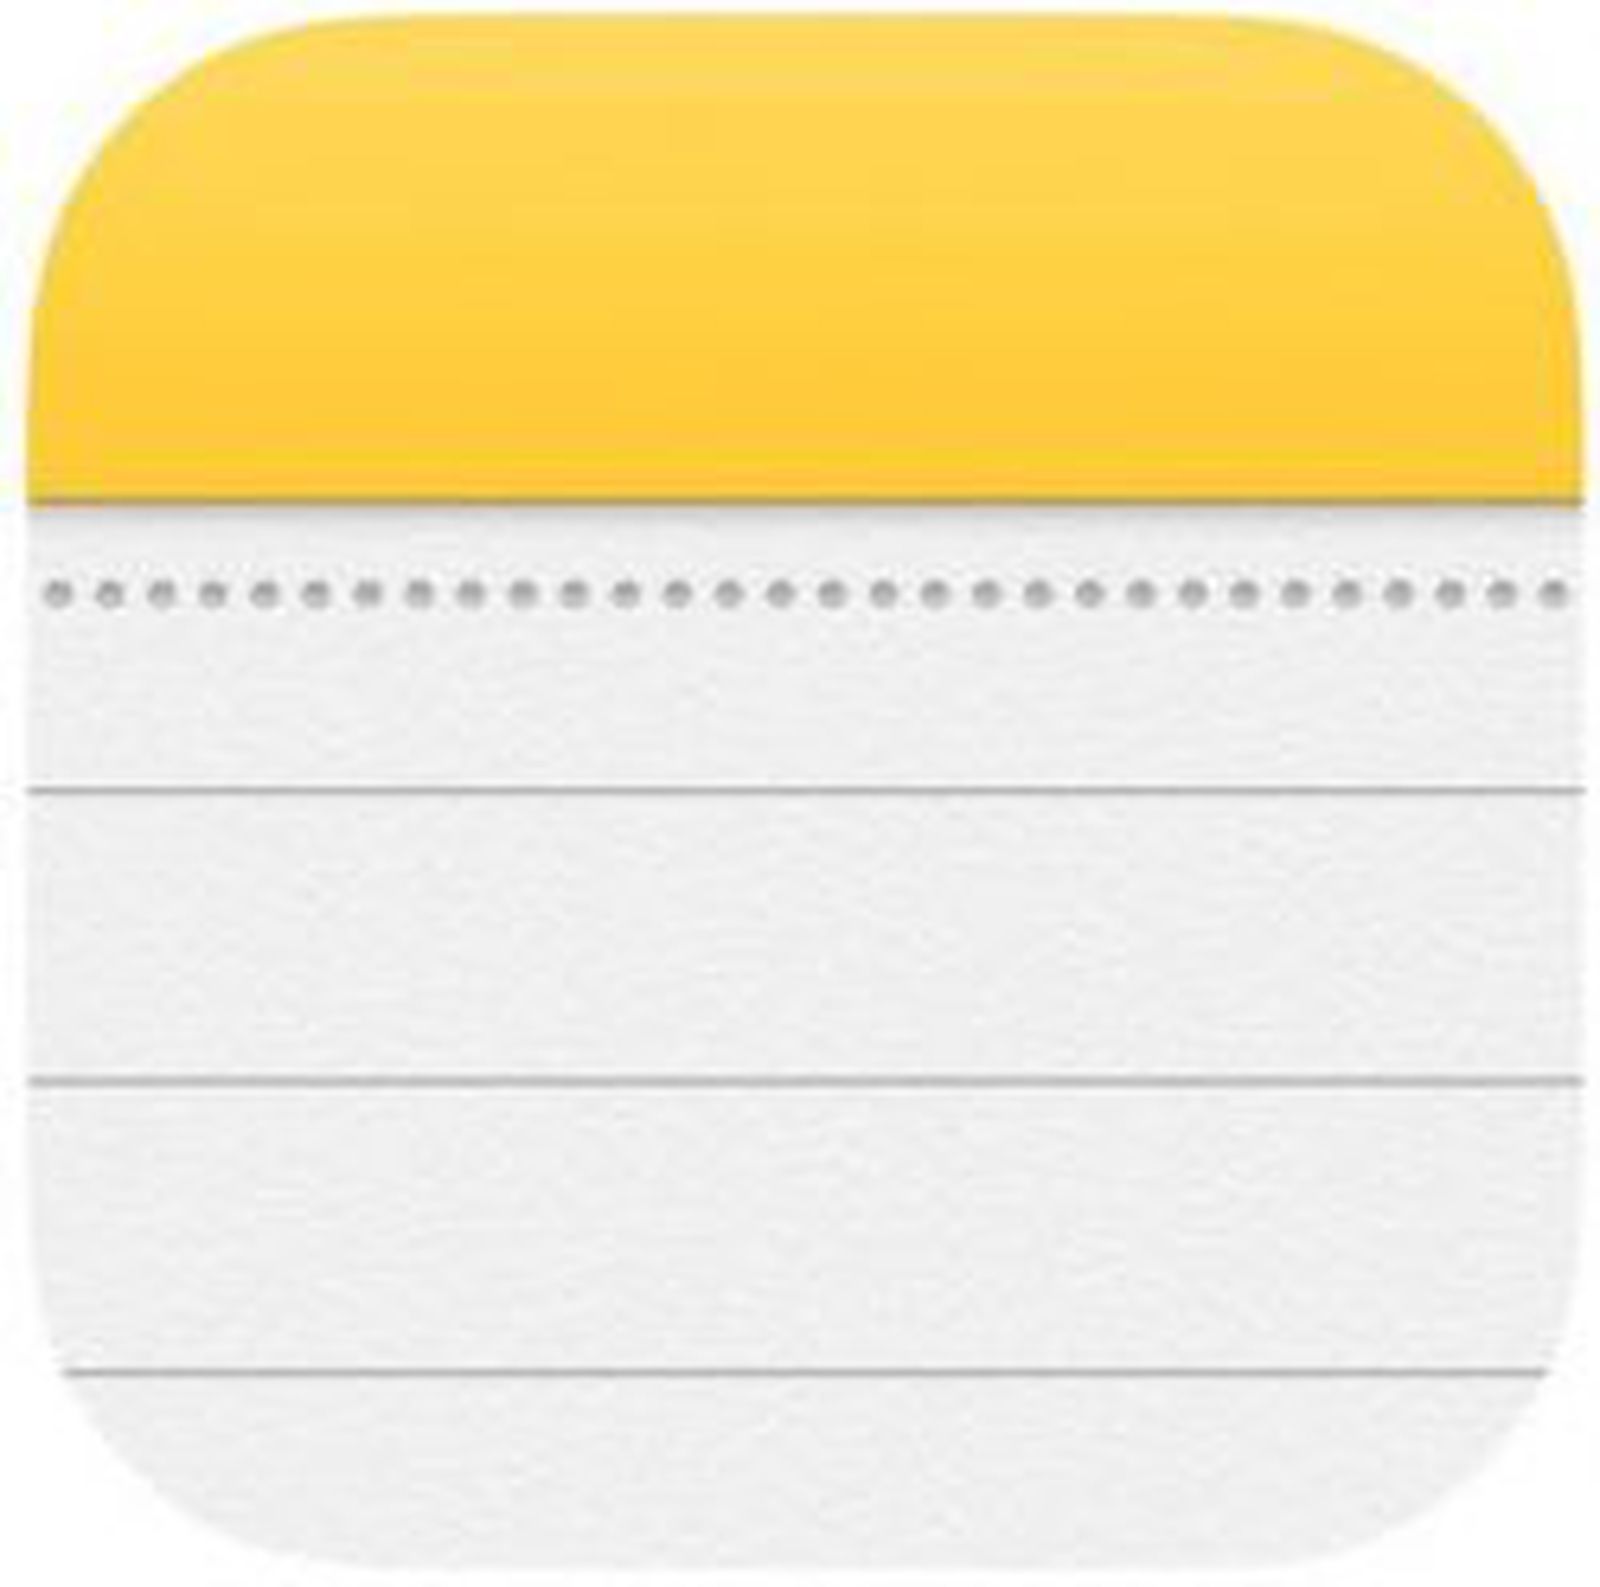 How to Share Folders in the iOS Notes App